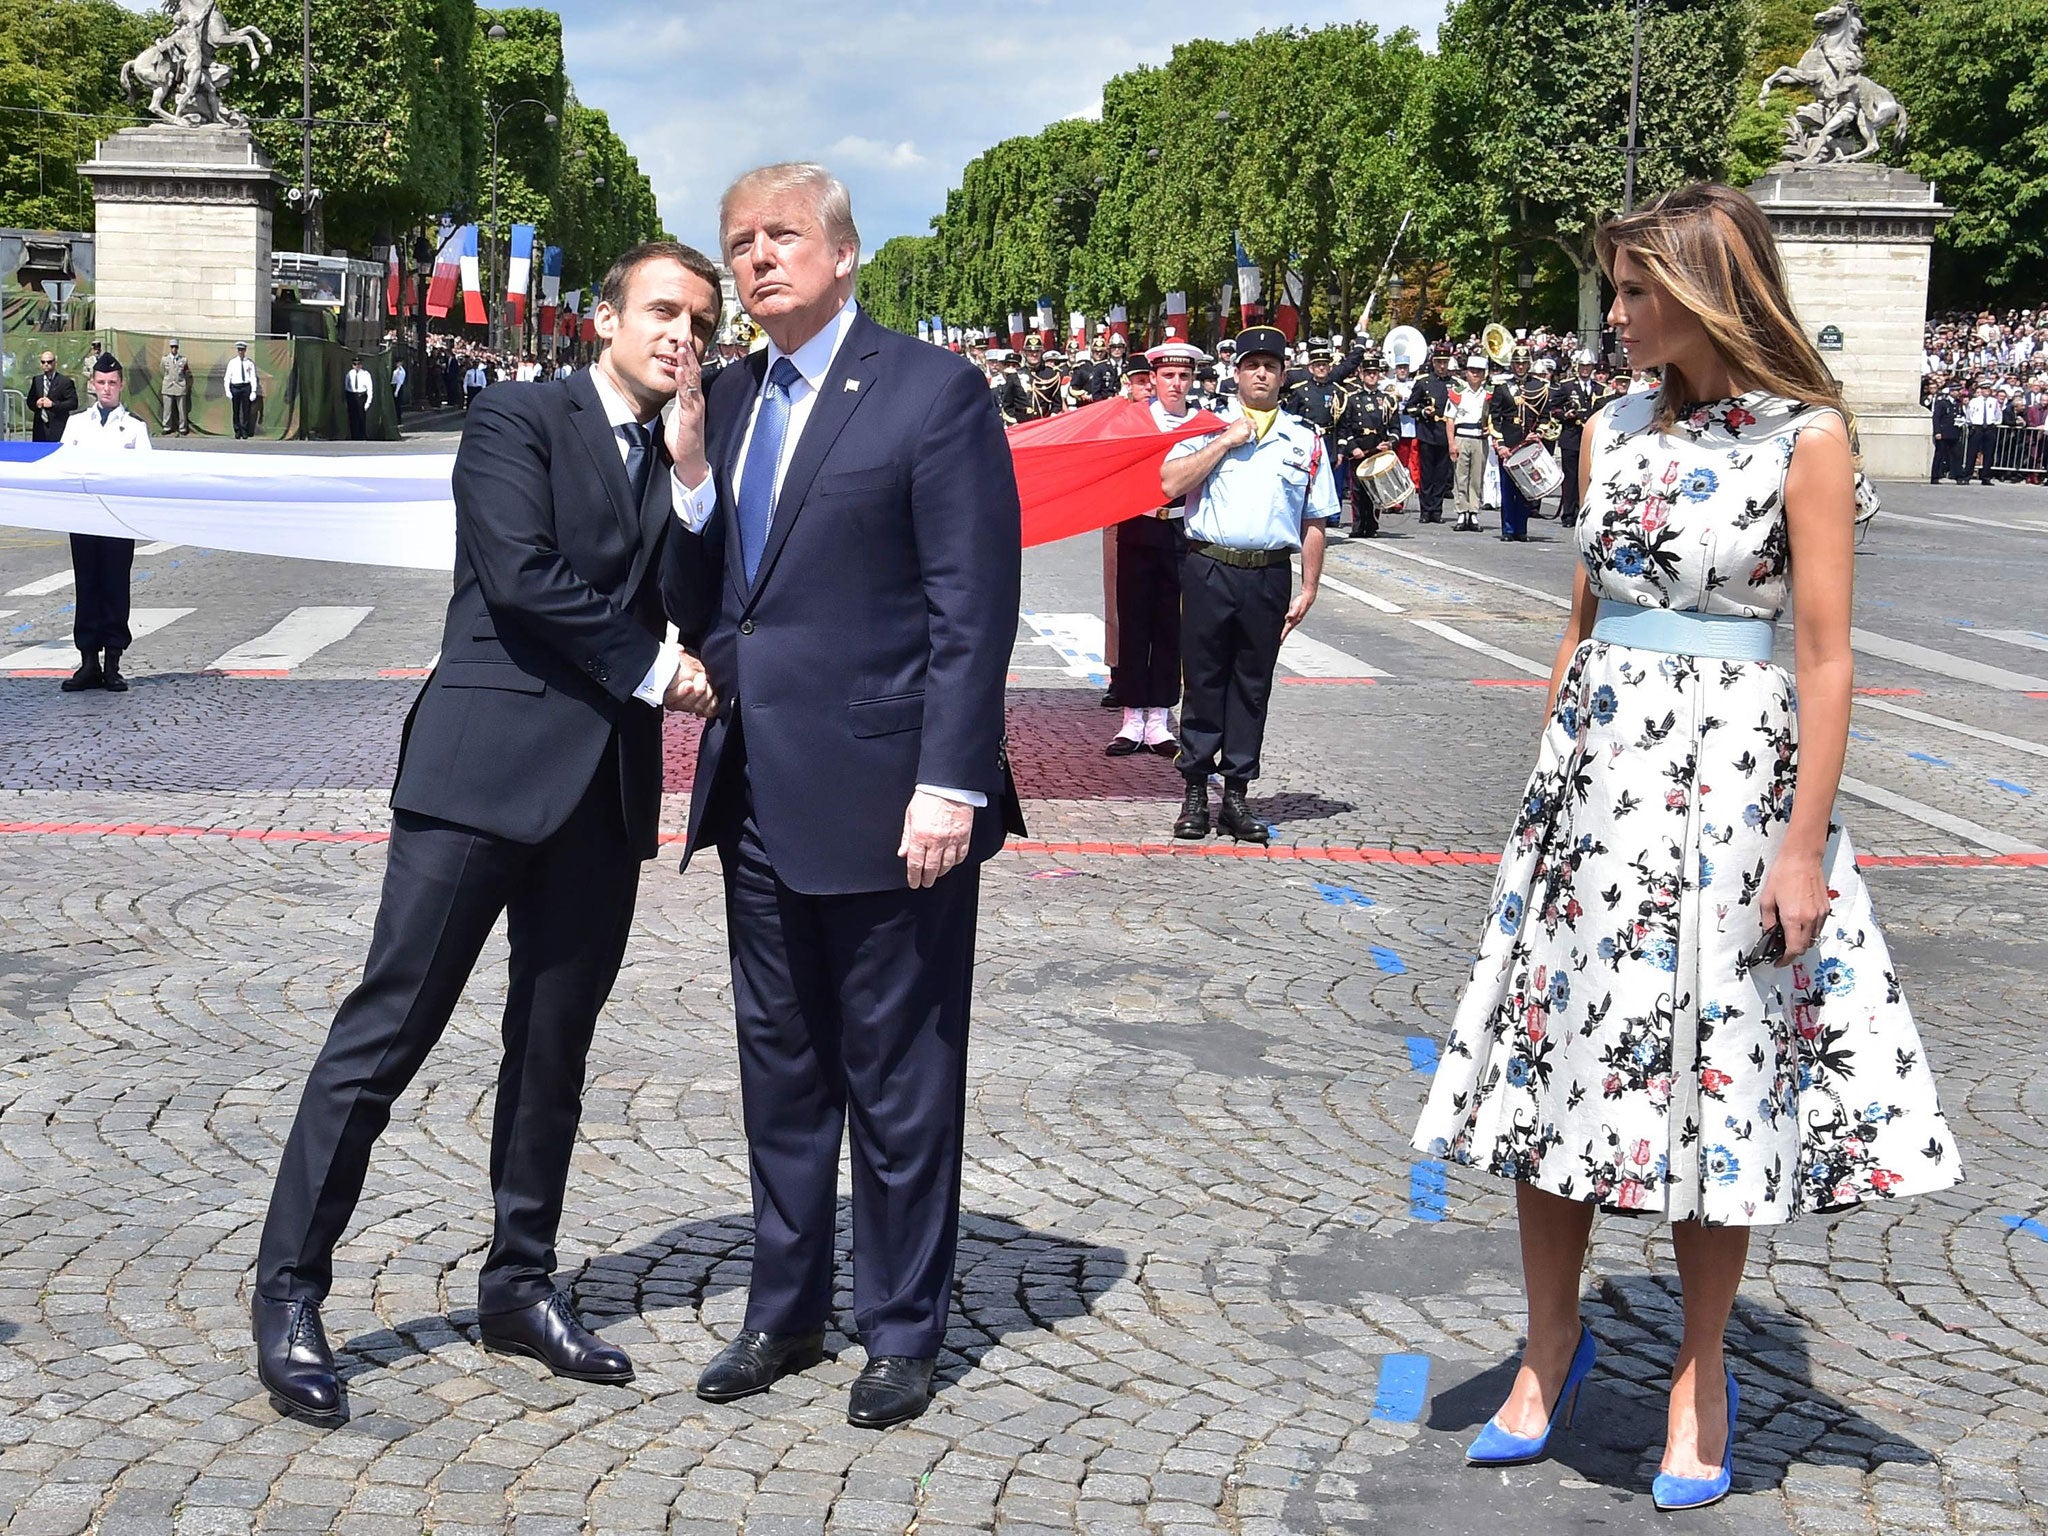 French President Emmanuel Macron shakes hands with US President Donald Trump, next to US First Lady Melania Trump, during the annual Bastille Day military parade on the Champs-Elysees